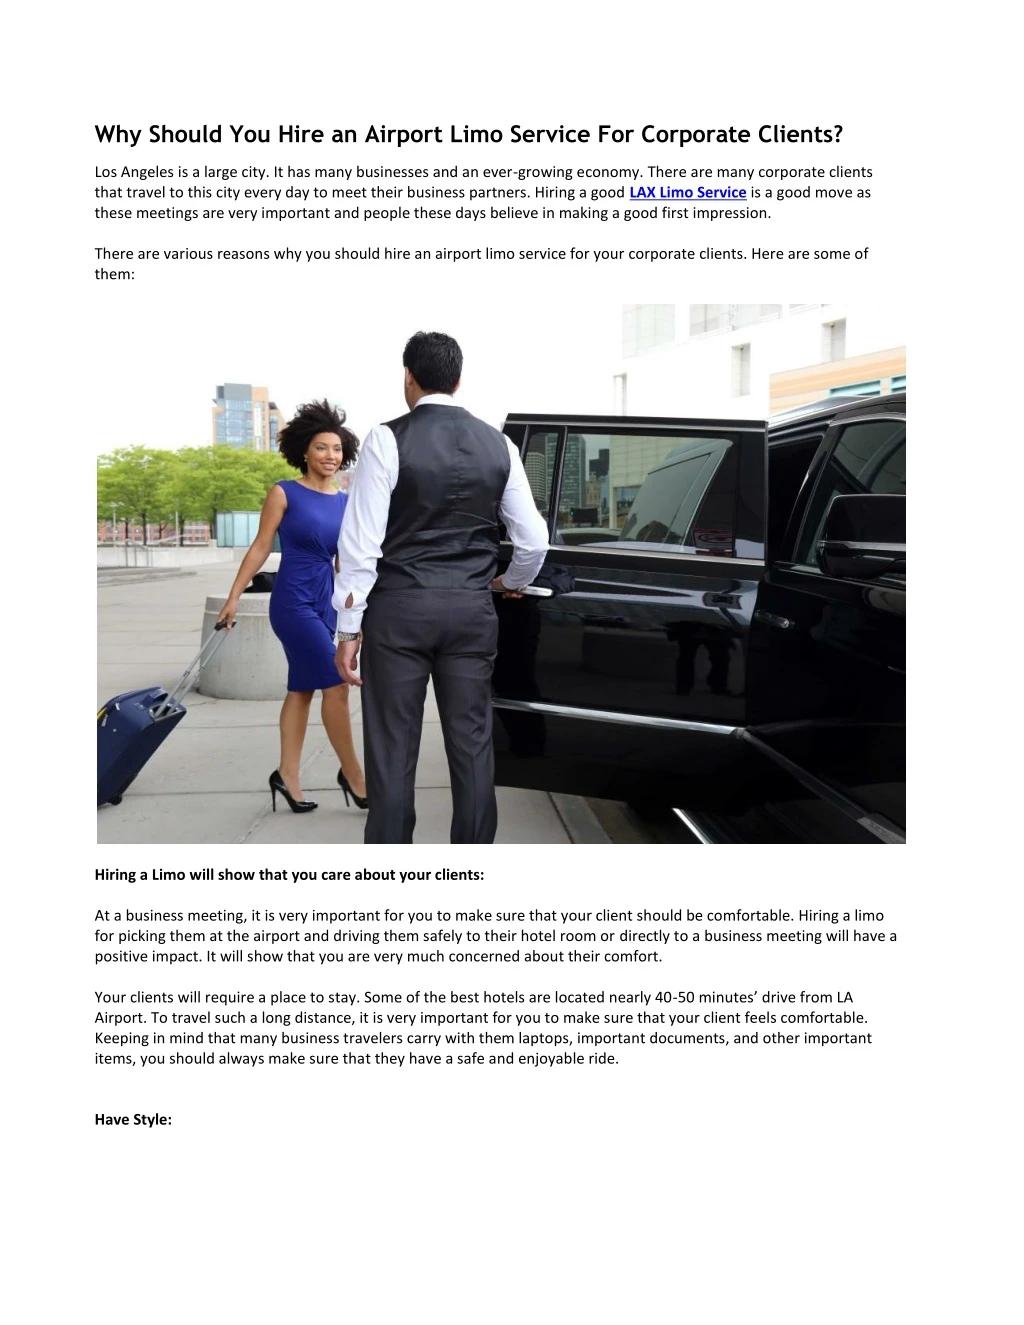 why should you hire an airport limo service